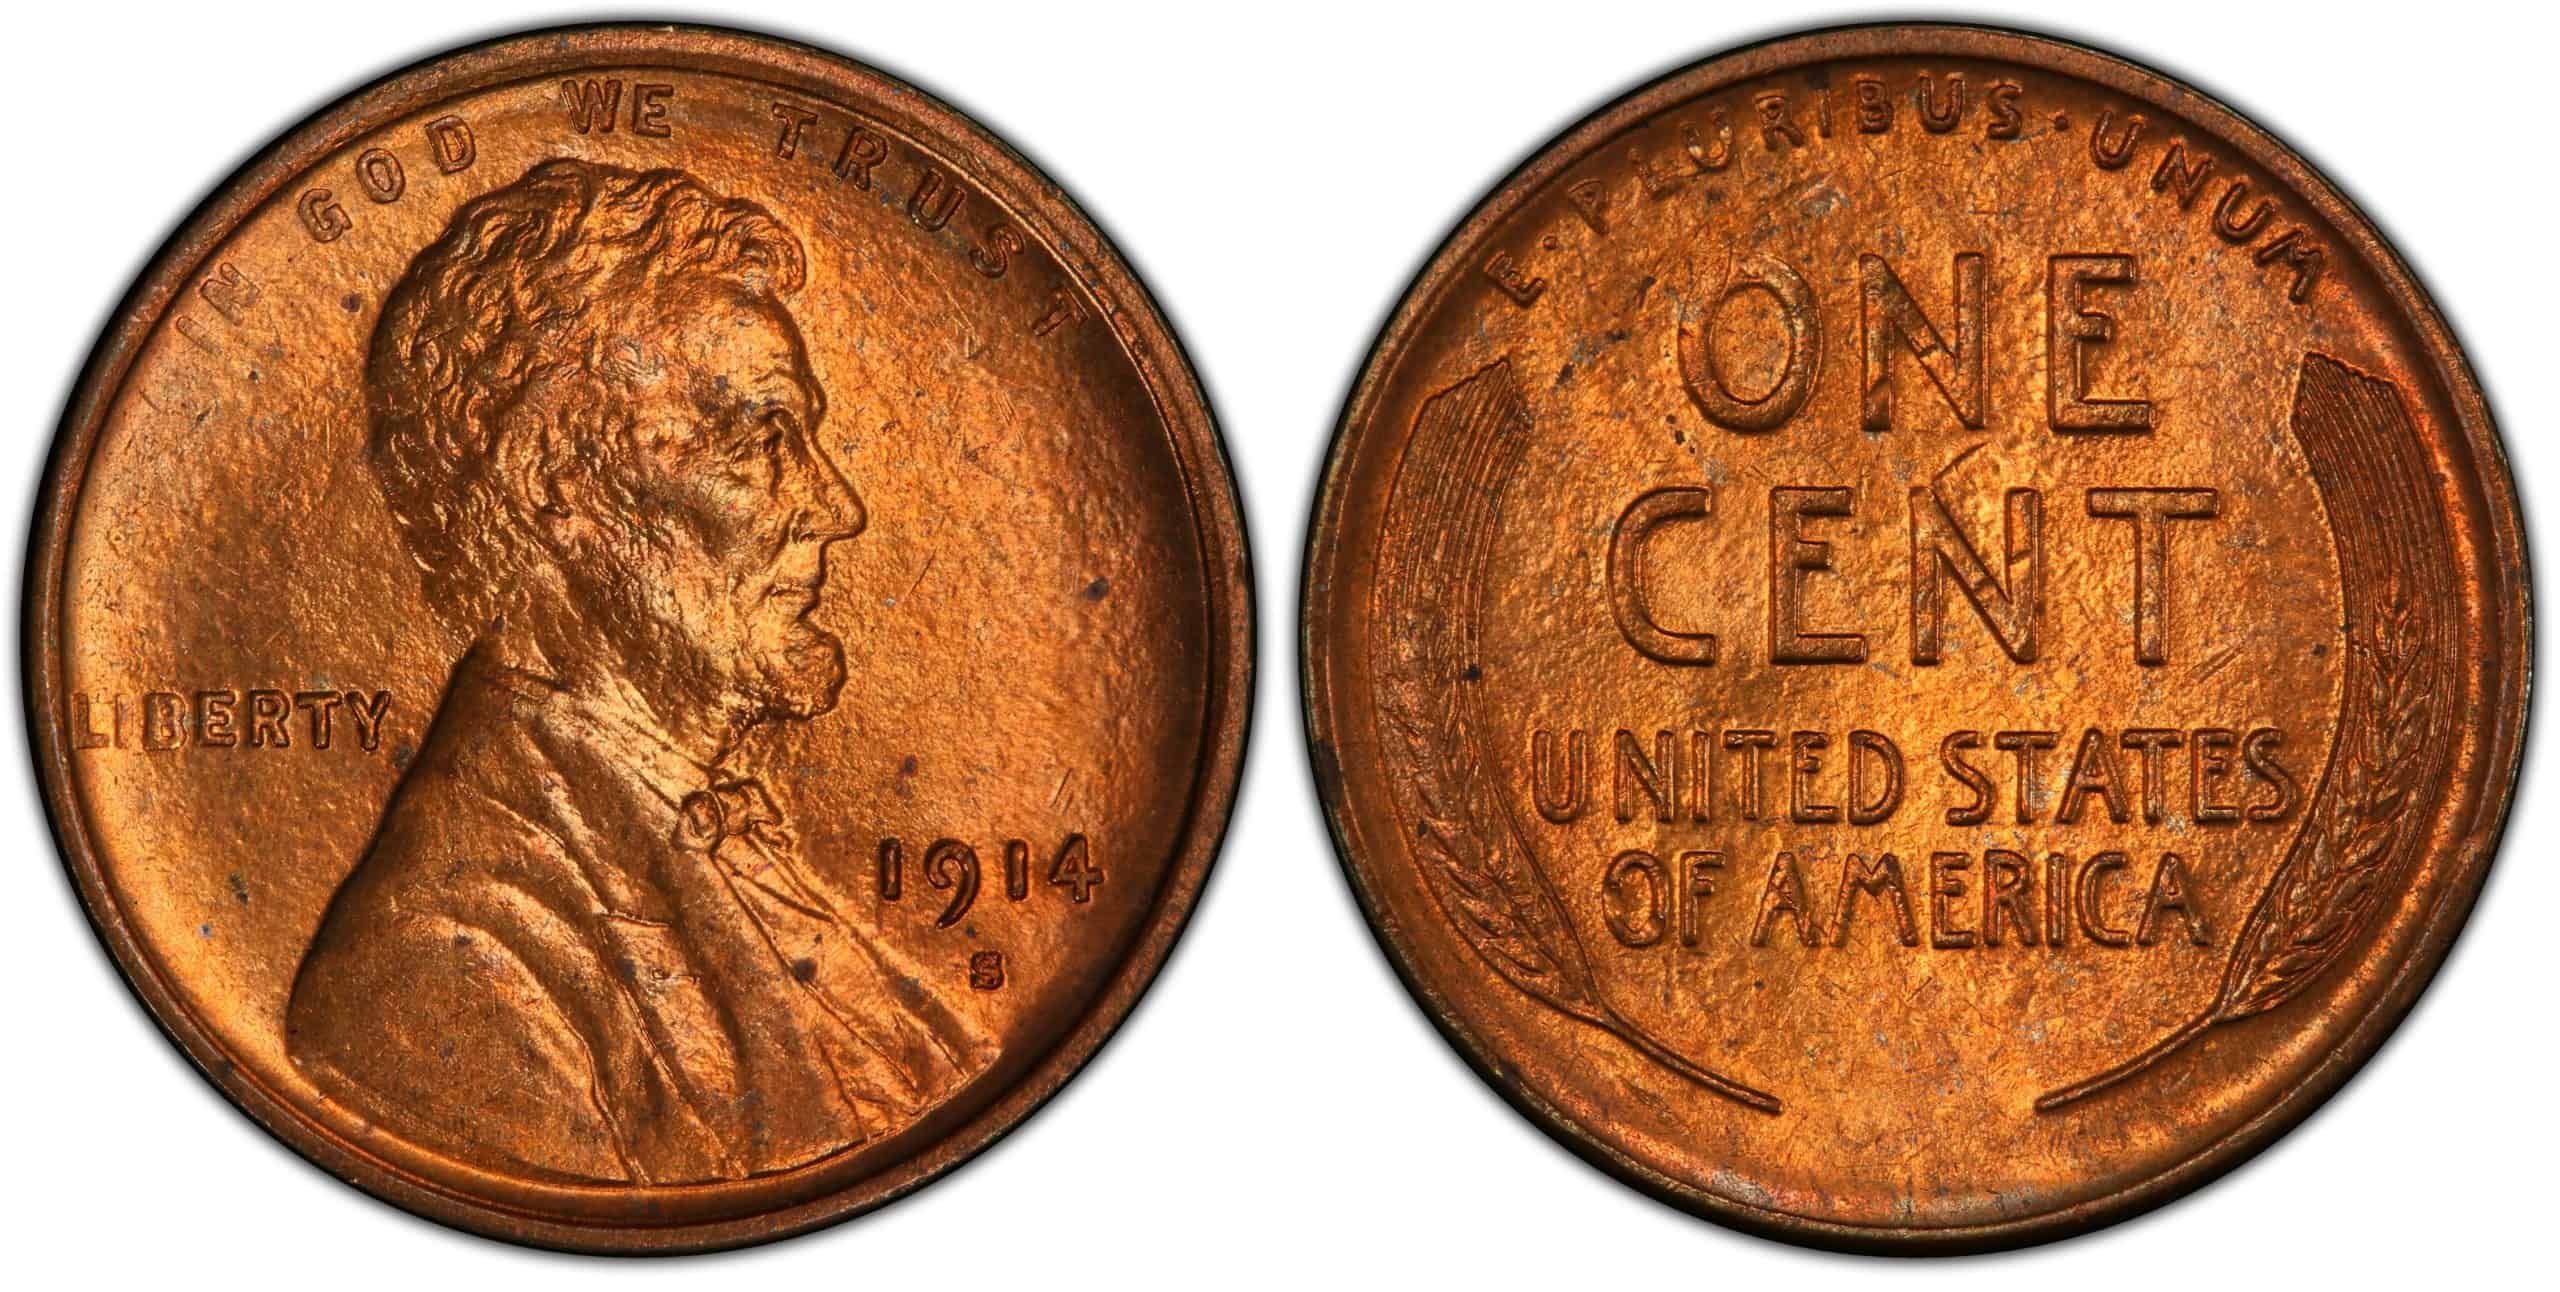 1914-S Lincoln Penny - $105,800